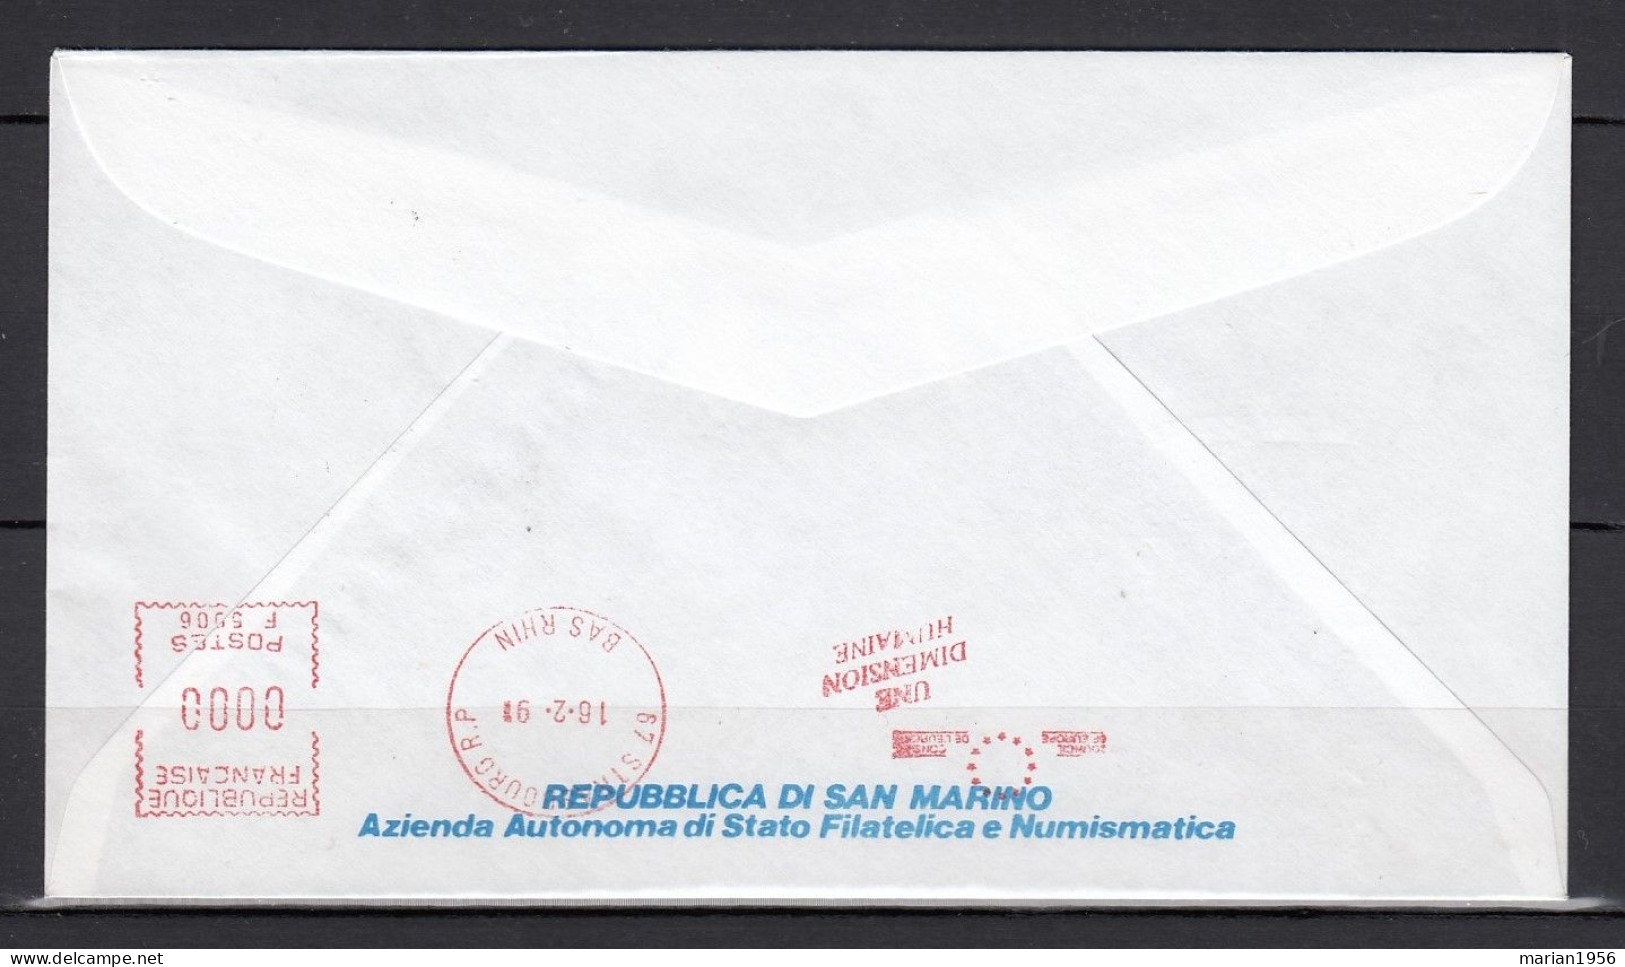 Saint-Marin 1991 - FDC Special - EUROPA CEPT - Europe Spatiale - Tirage Limite A 60 Ex.numerotes - 1991